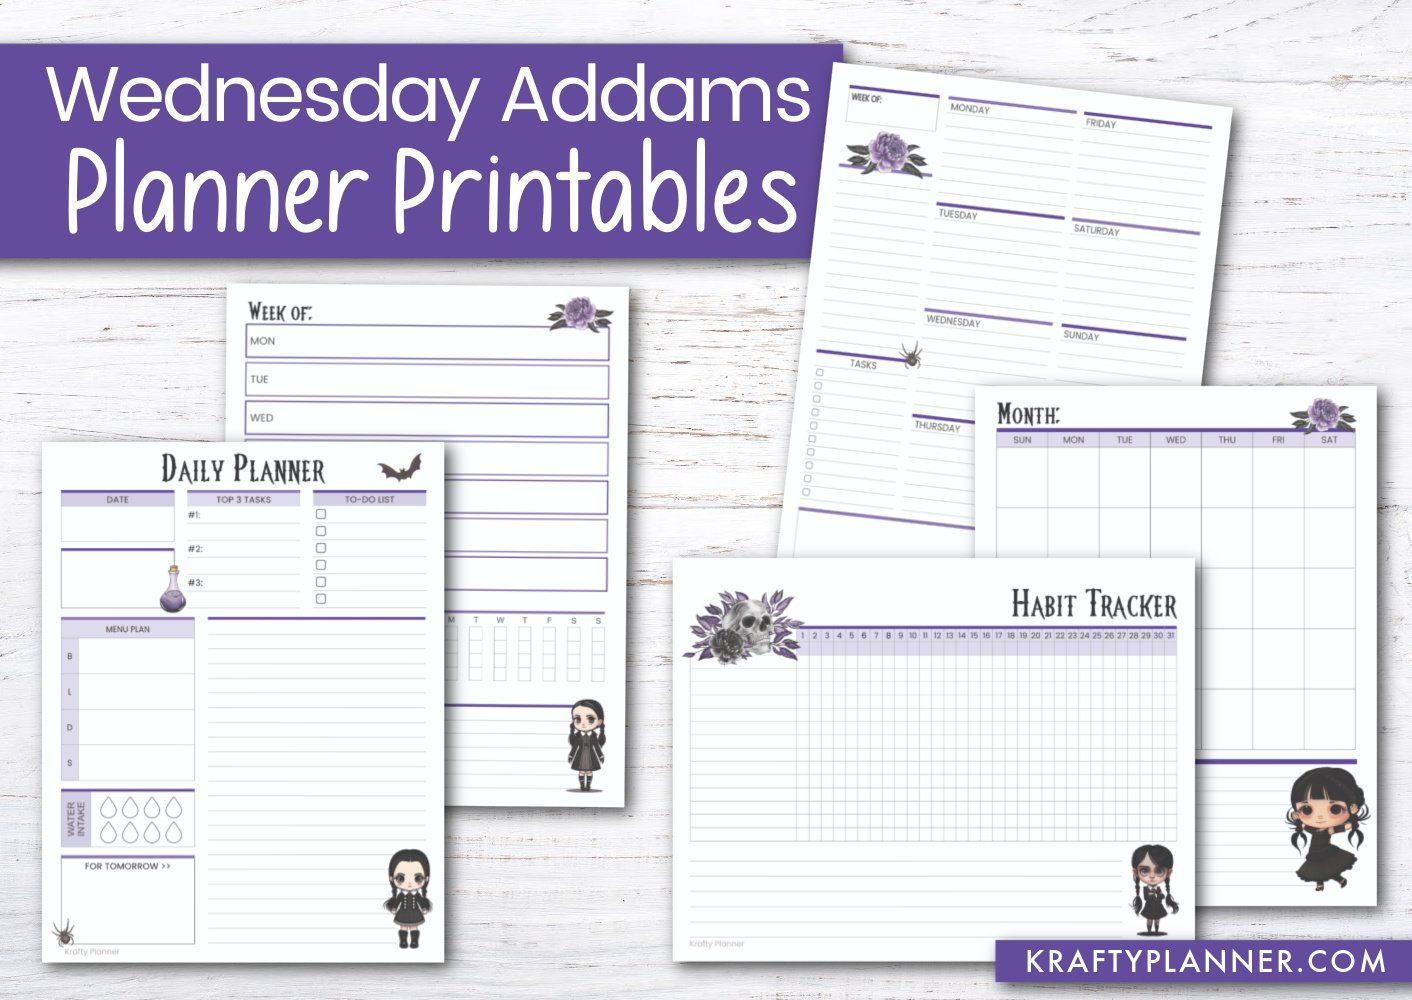 Free Printable Wednesday Addams Planning Pages